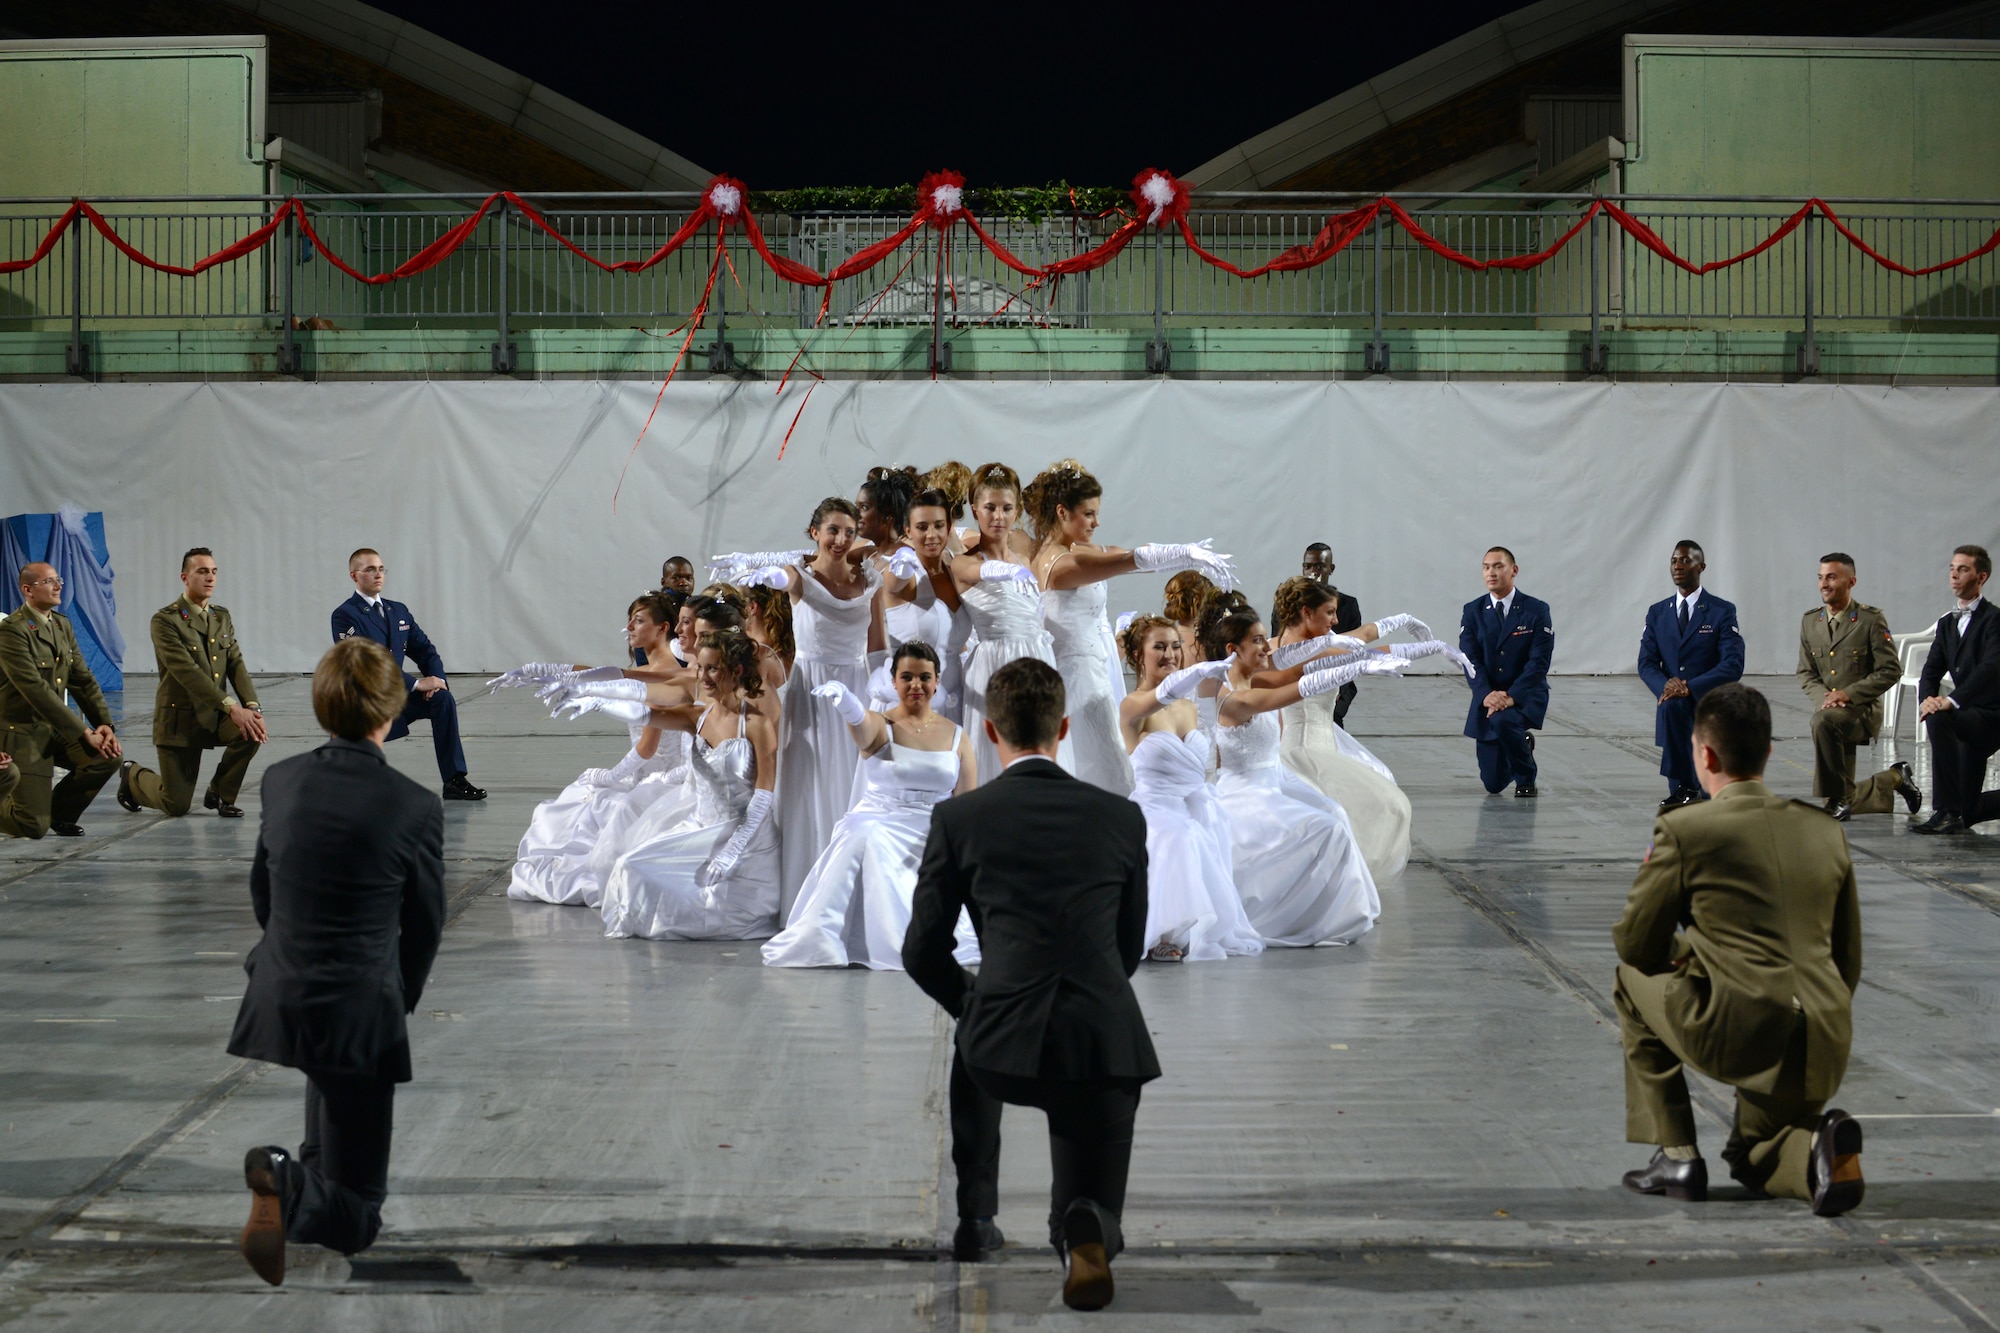 Participants of the 16th Annual Debutant Ball perform their dance routine in Cordenons, Italy, June 22, 2014. During the ball, 18-year-old Italian girls, or debutants, were introduced into society for having reached the age of adulthood. (U.S. Air Force photo/Airman 1st Class Ryan Conroy) 